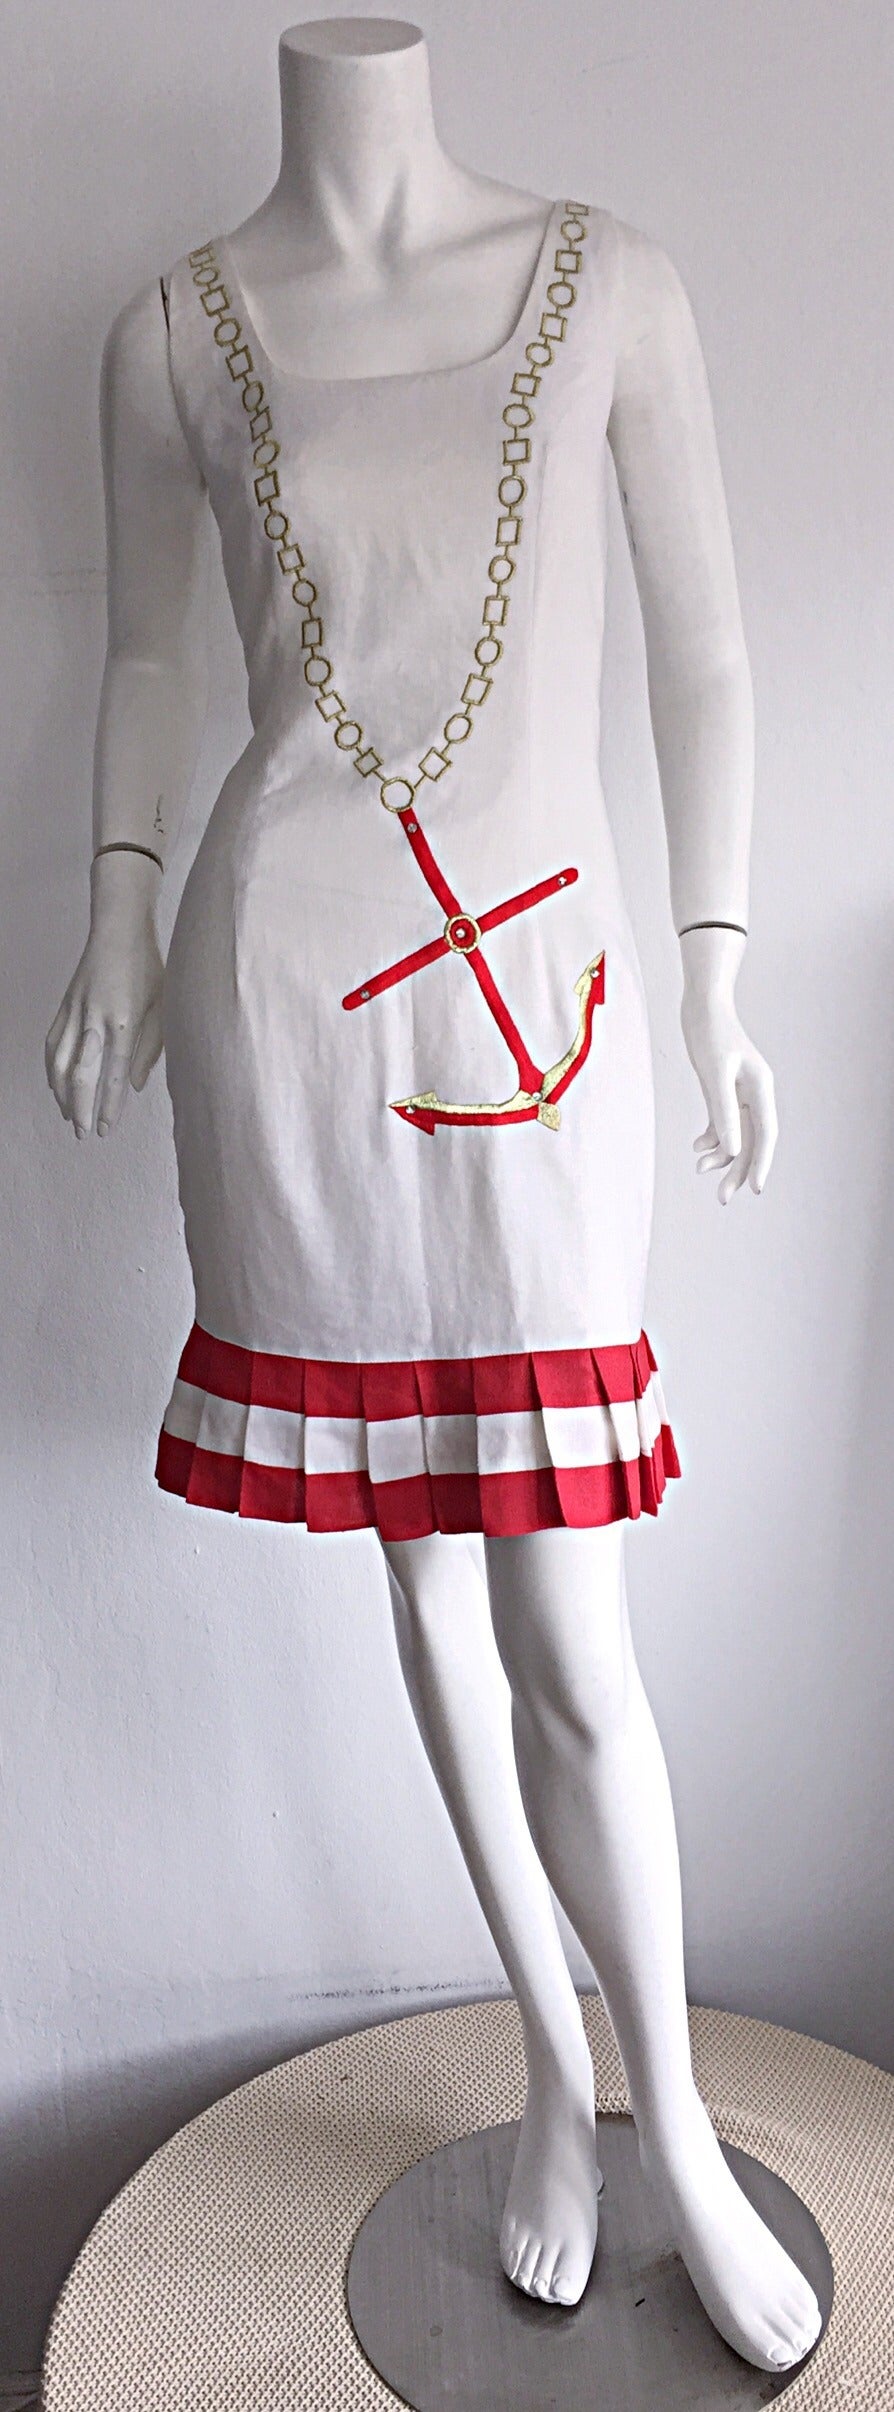 Amazing vintage 1990s nautical dress! Fully lined fine linen, with gold silk thread printed to look like a chain necklace, with red embroidered anchor, encrusted with three rhinestones. Pleated red and white hem. Easily transitions from day to